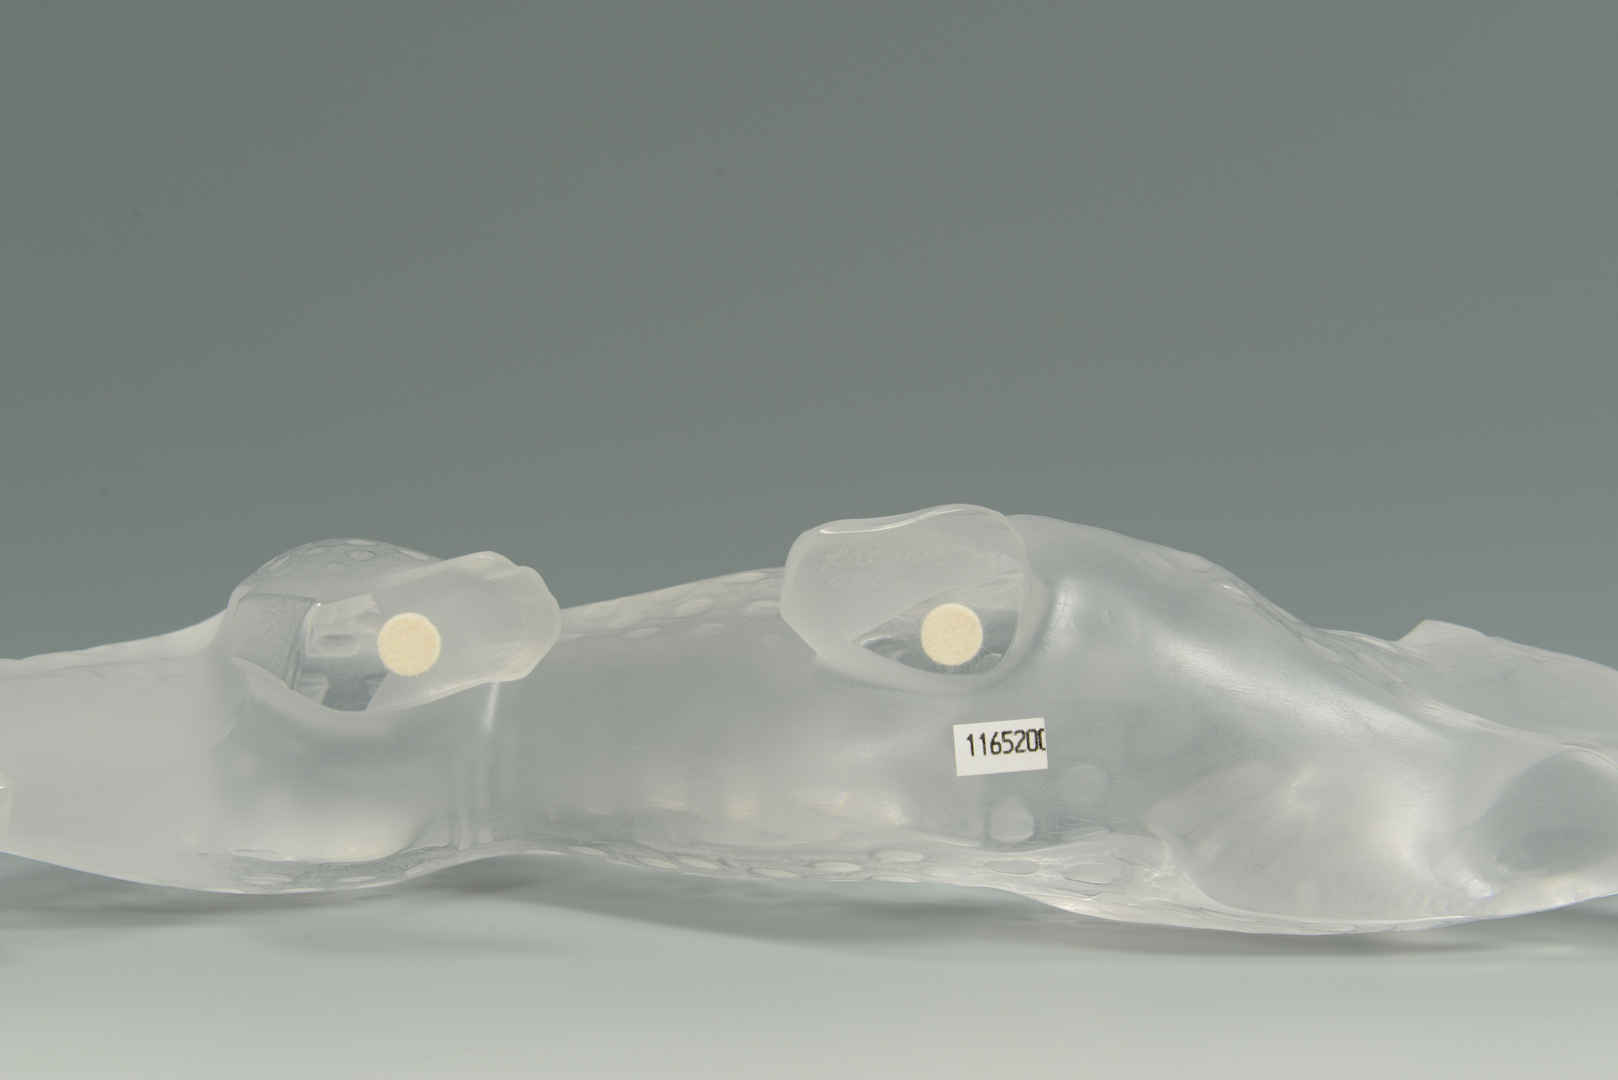 Lot 3088100: Lalique French Crystal Leopard